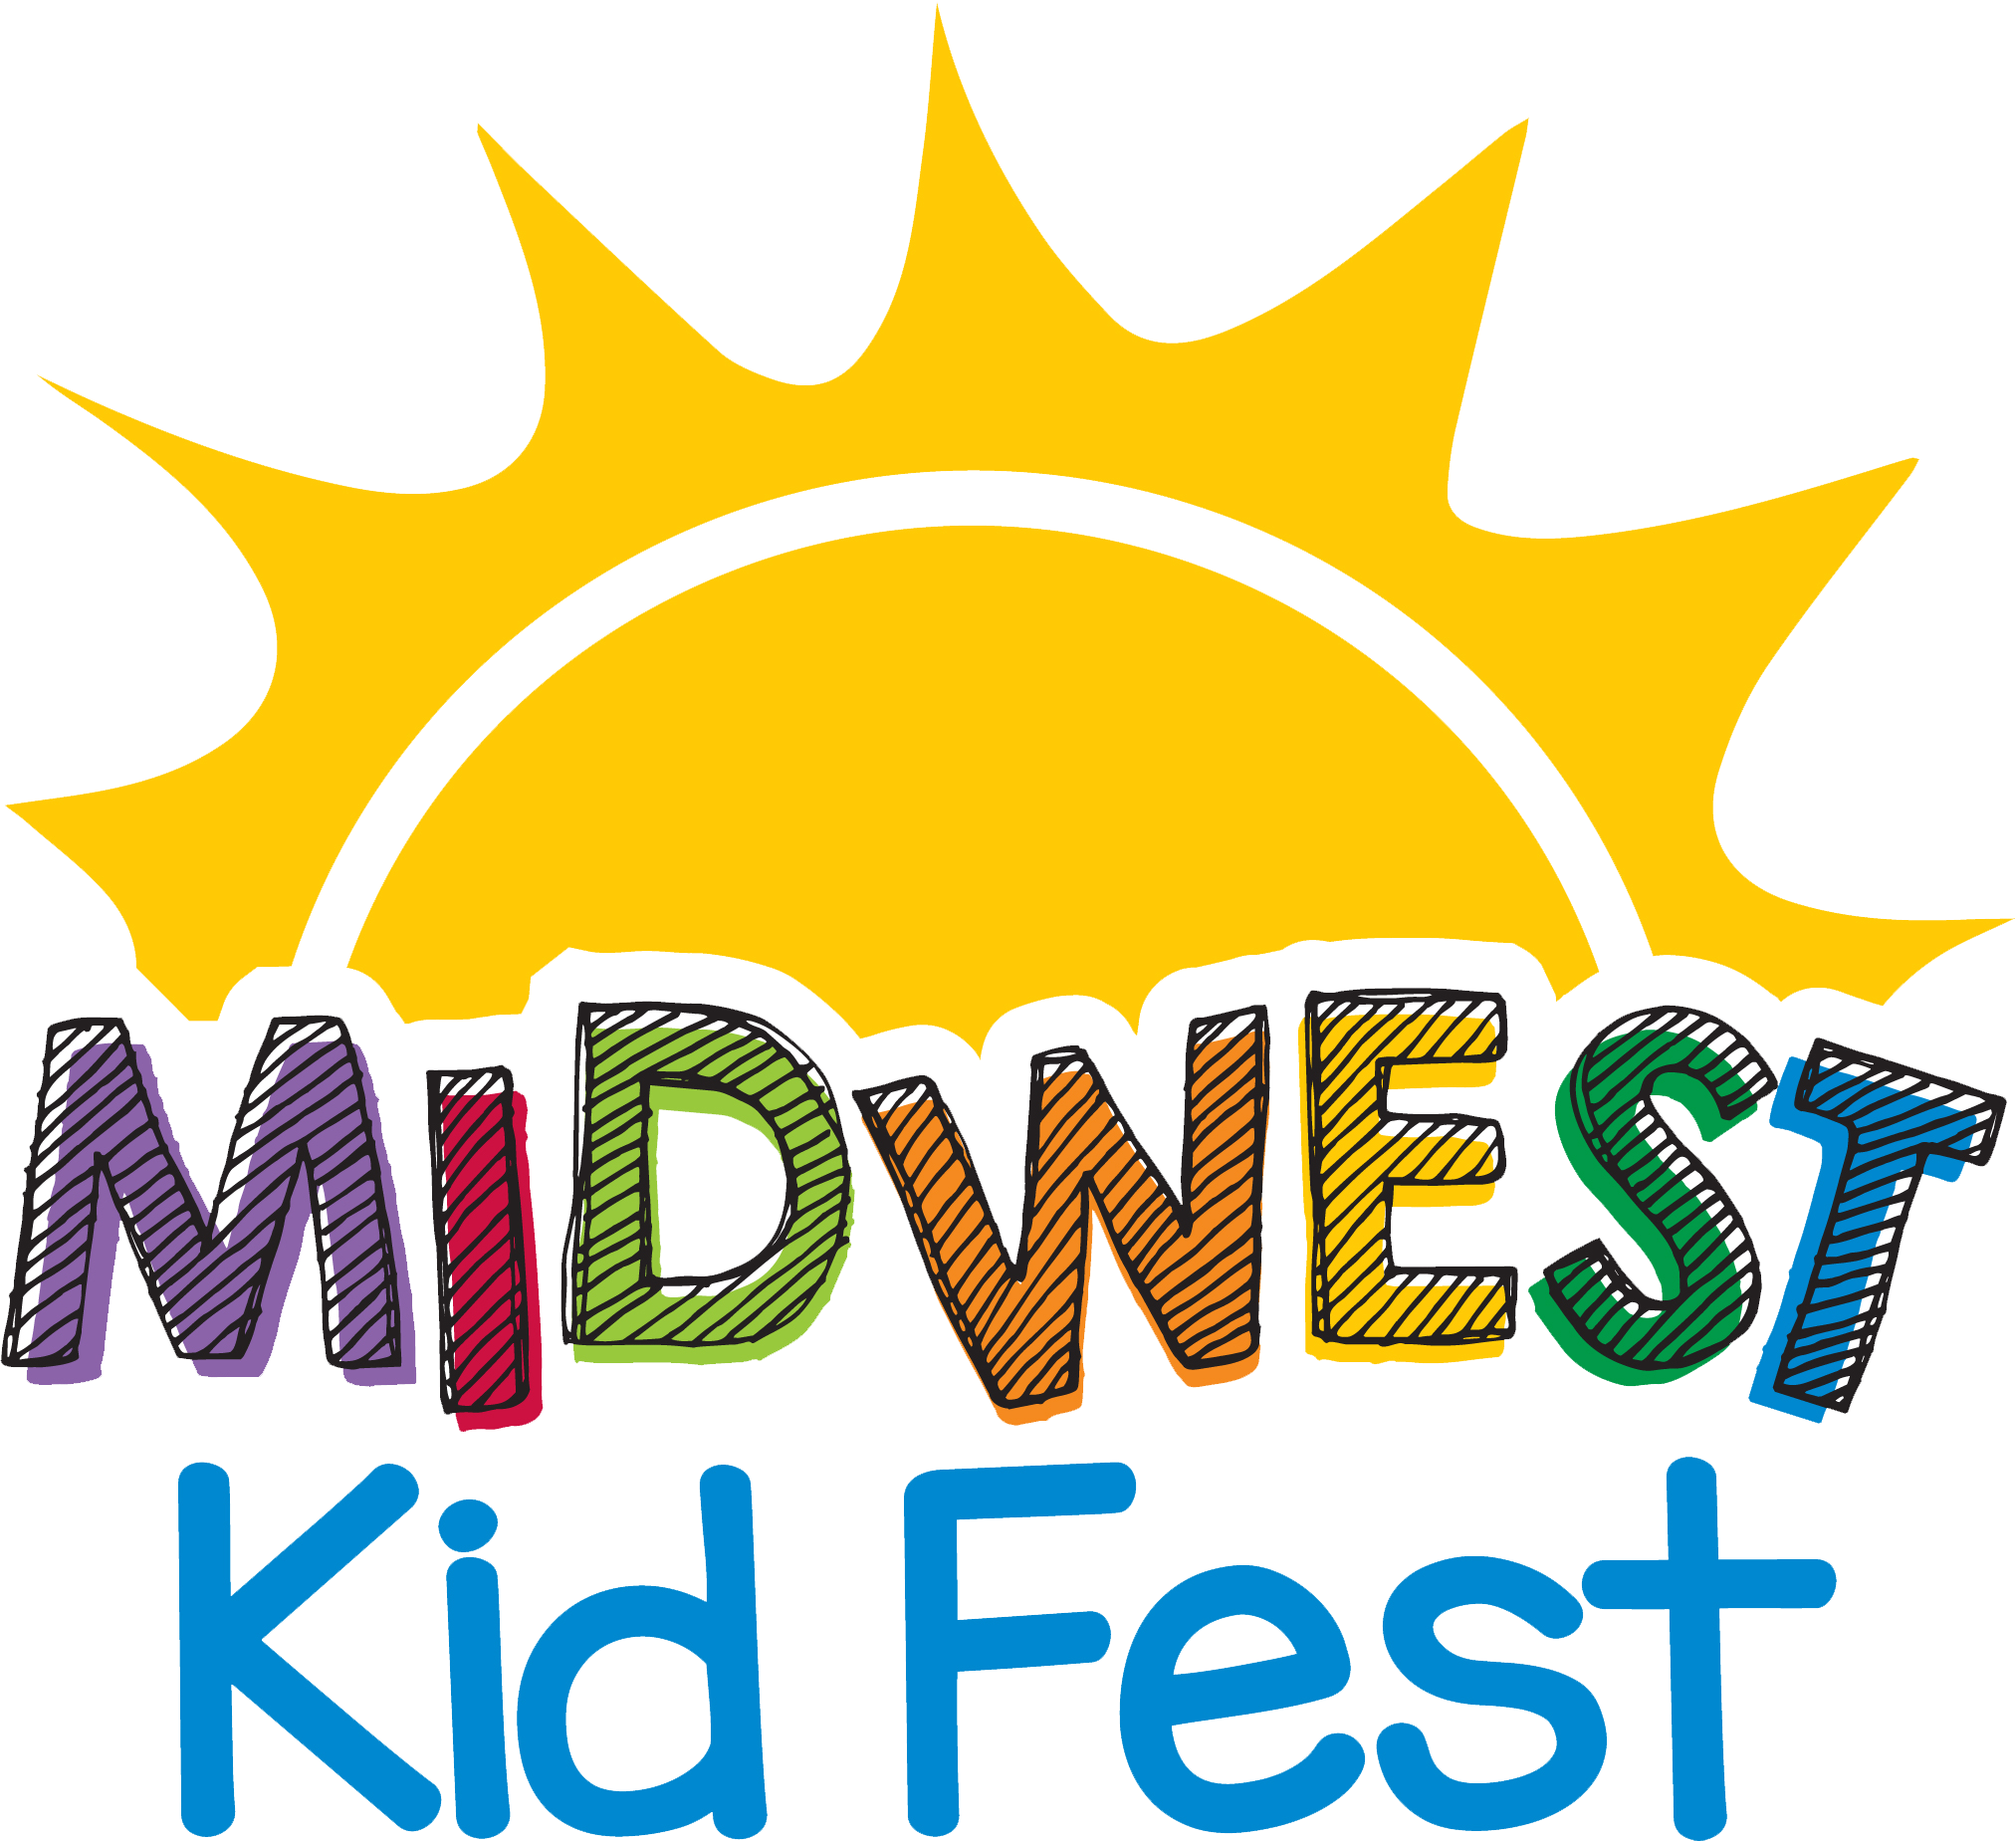 This image shows the Midwest Kid Fest logo.